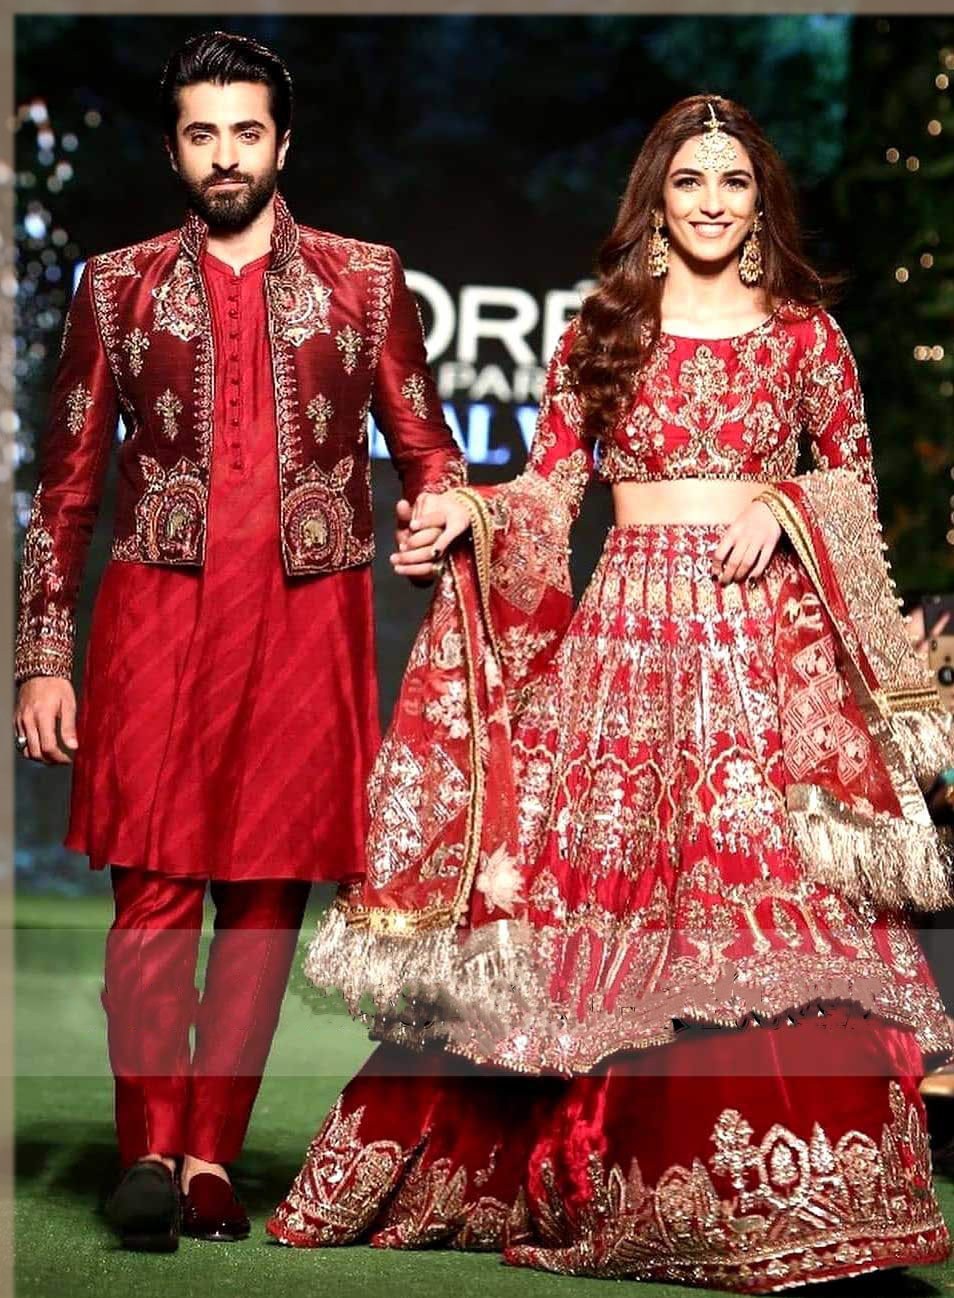 Bride and Groom Wedding Dresses 2021 Latest Designs and Trends